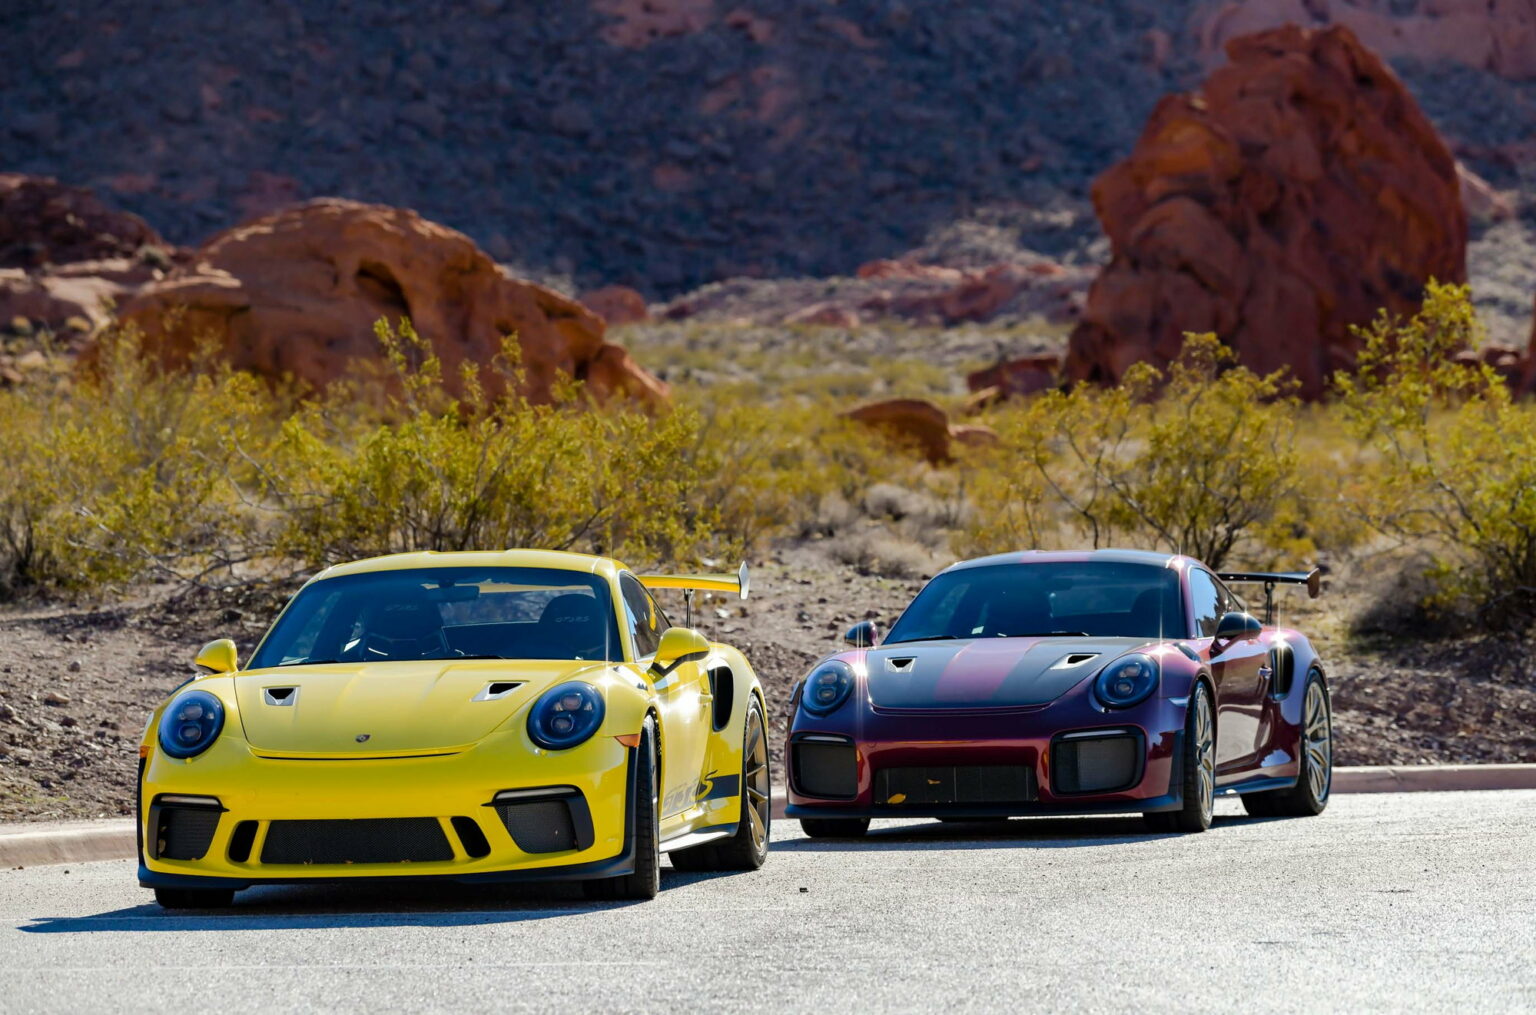 Porsche Dominates Vegas: A Look at the Luxury Car's Presence in the City of Lights